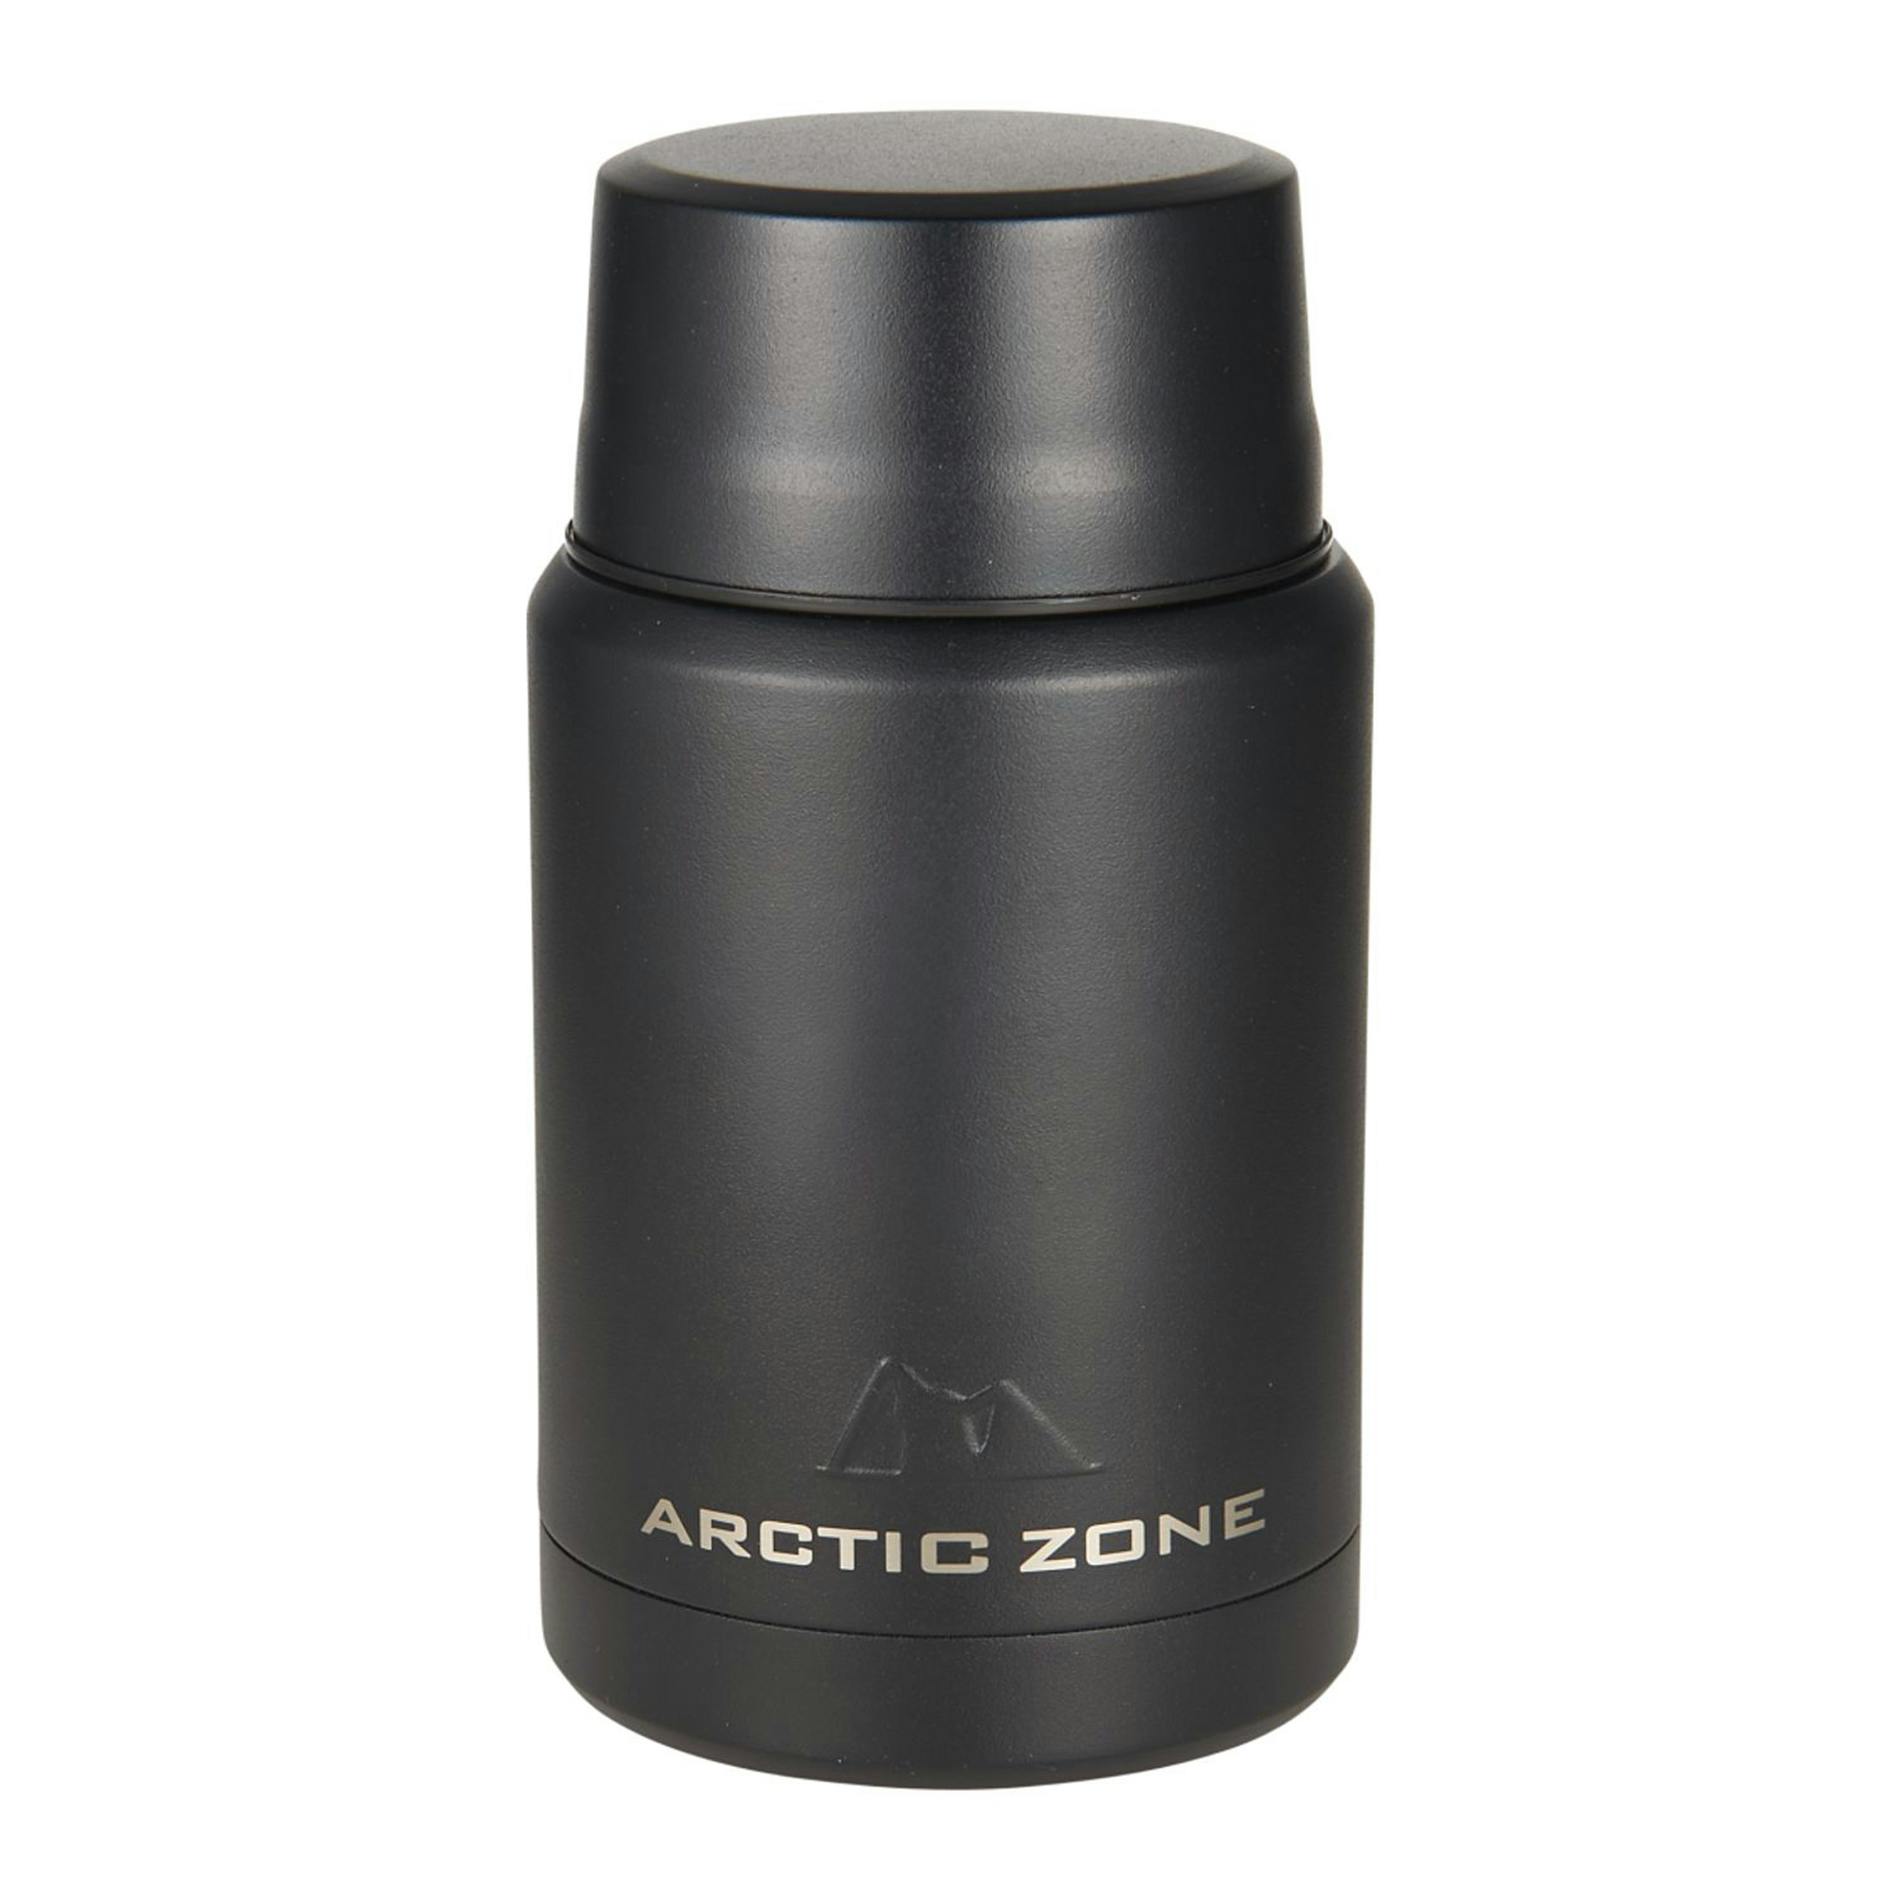 Arctic Zone® Titan Copper Insulated Food Storage - additional Image 2